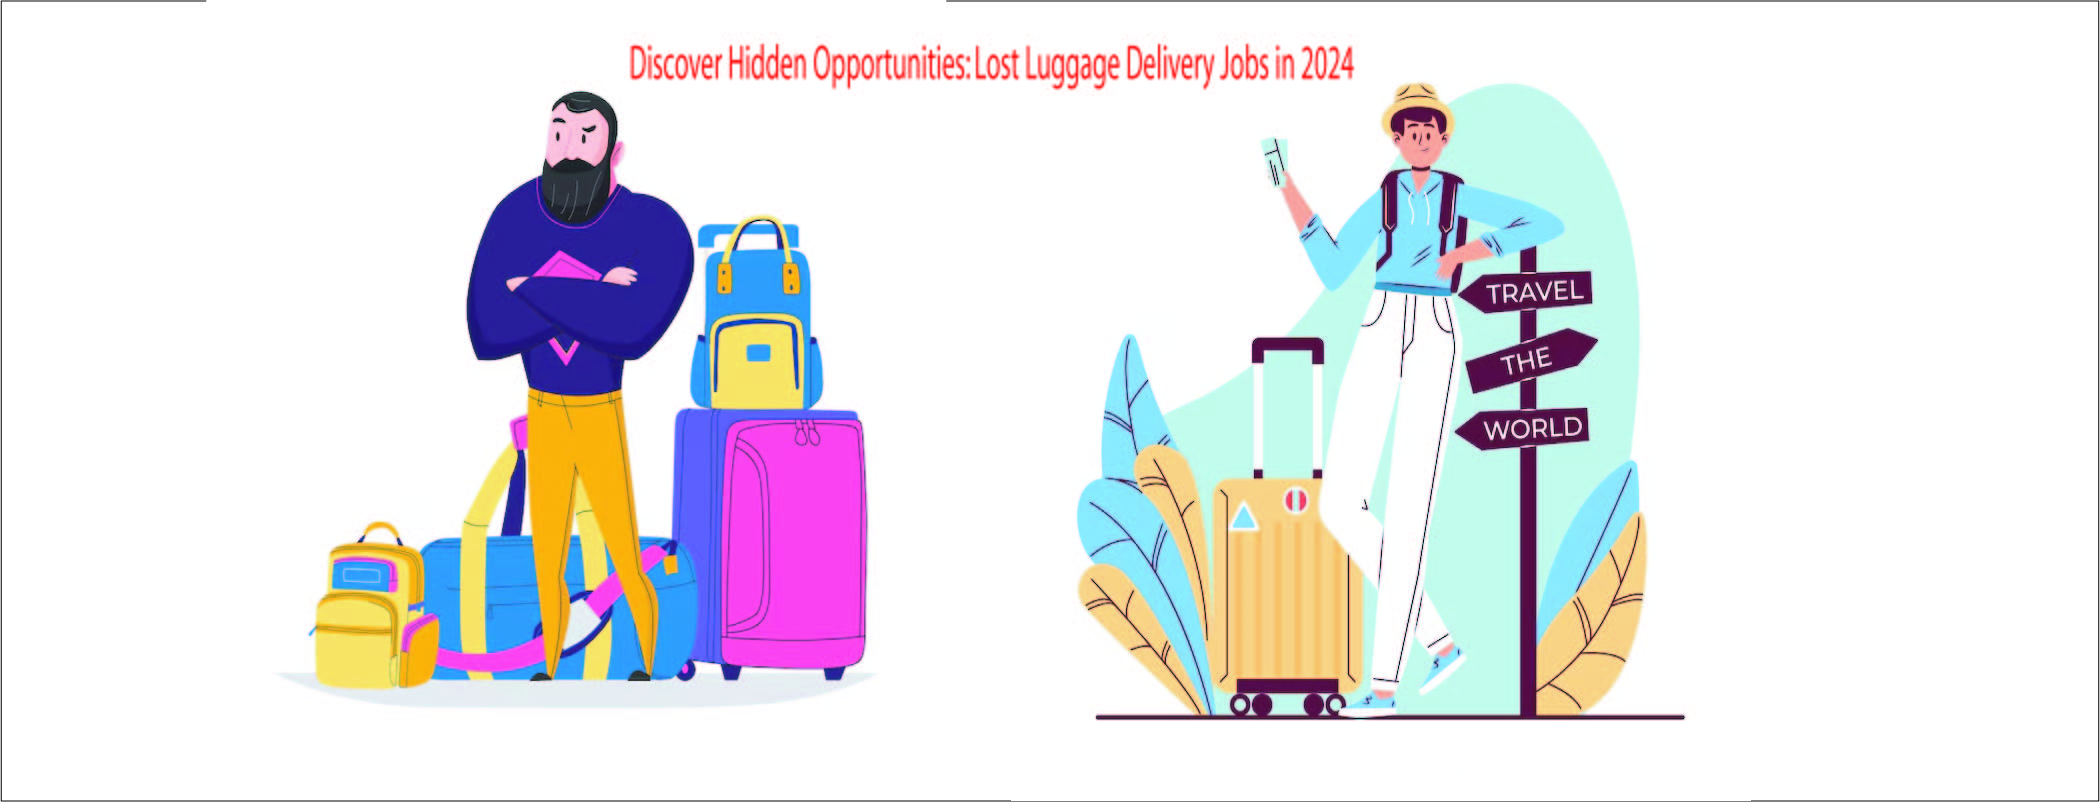 Lost Luggage Delivery Jobs